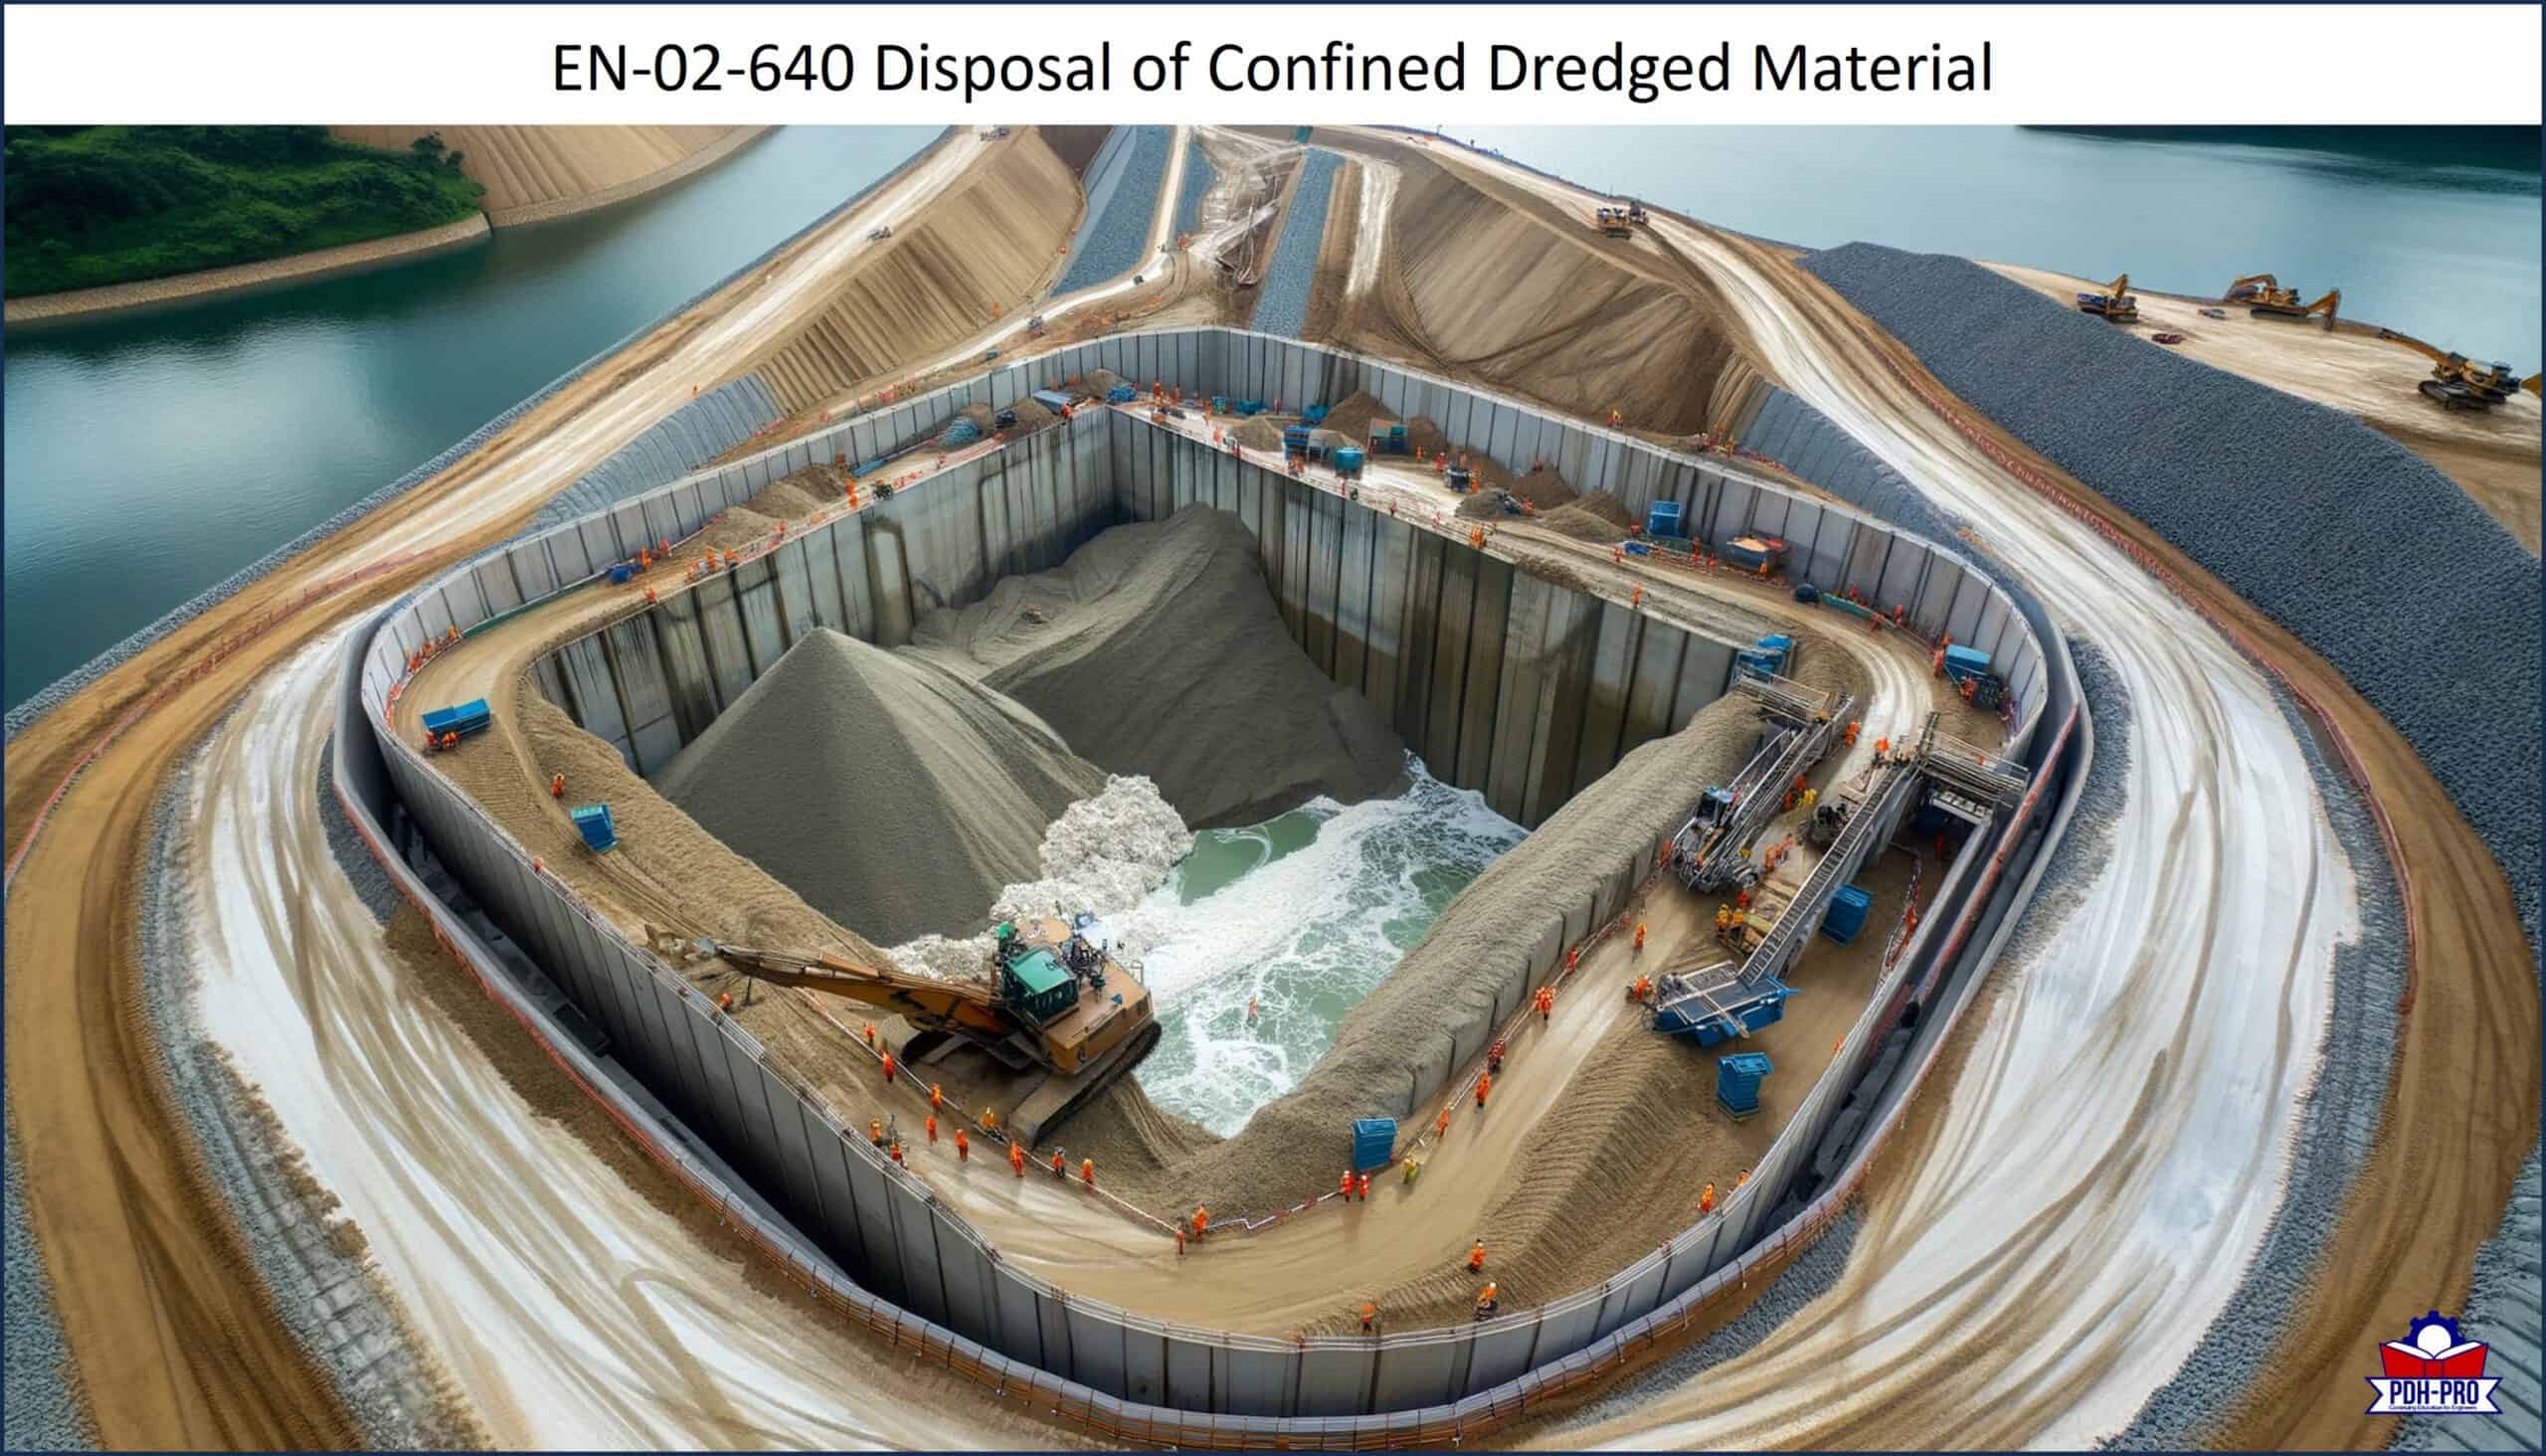 Disposal of Confined Dredged Material